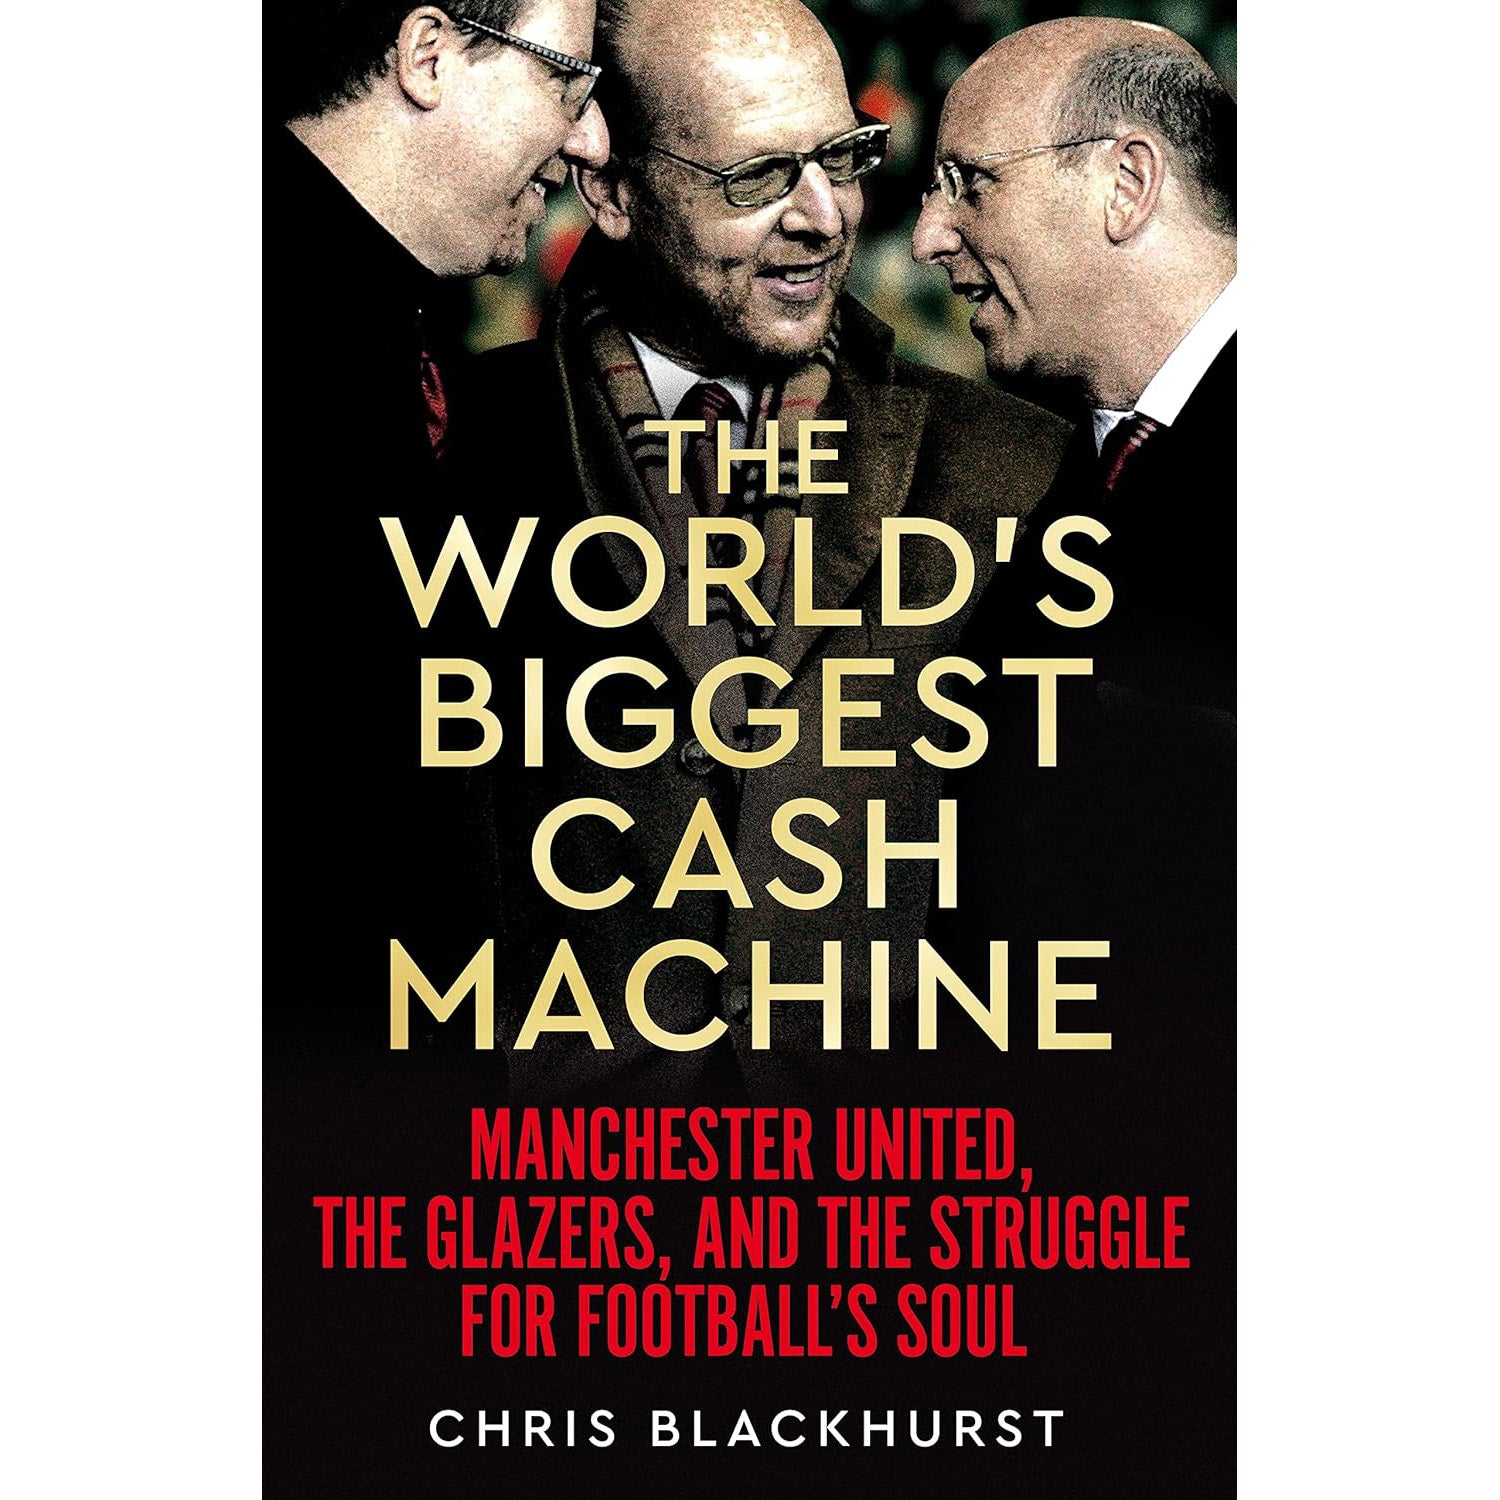 The World's Biggest Cash Machine – Manchester United, the Glazers, and the Struggle for Football's Soul